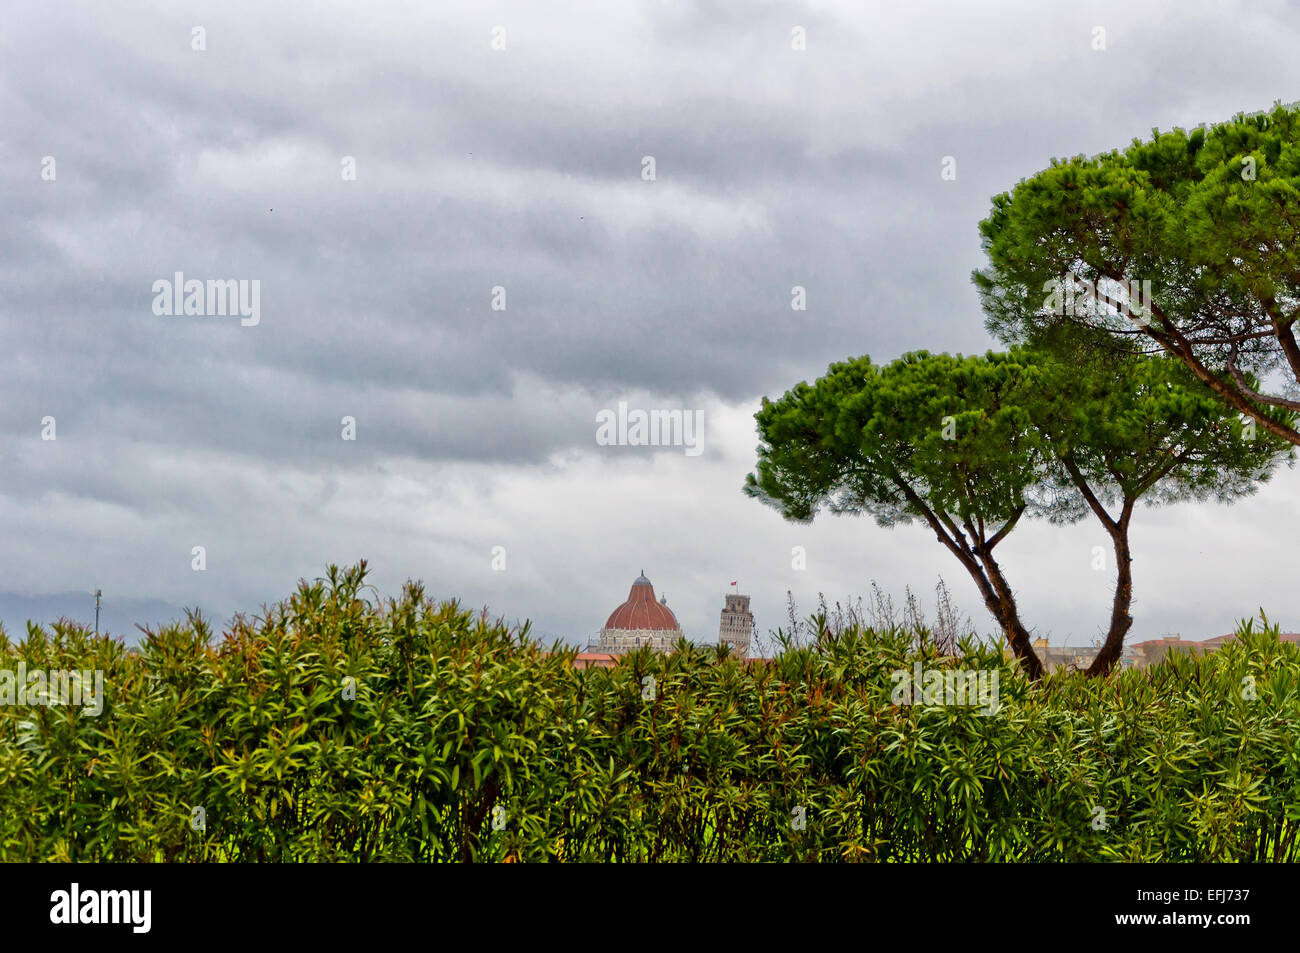 Pisa, Italy: top of Baptistery, Cathedral, and Leaning Tower appear in the background over a green hedge Stock Photo